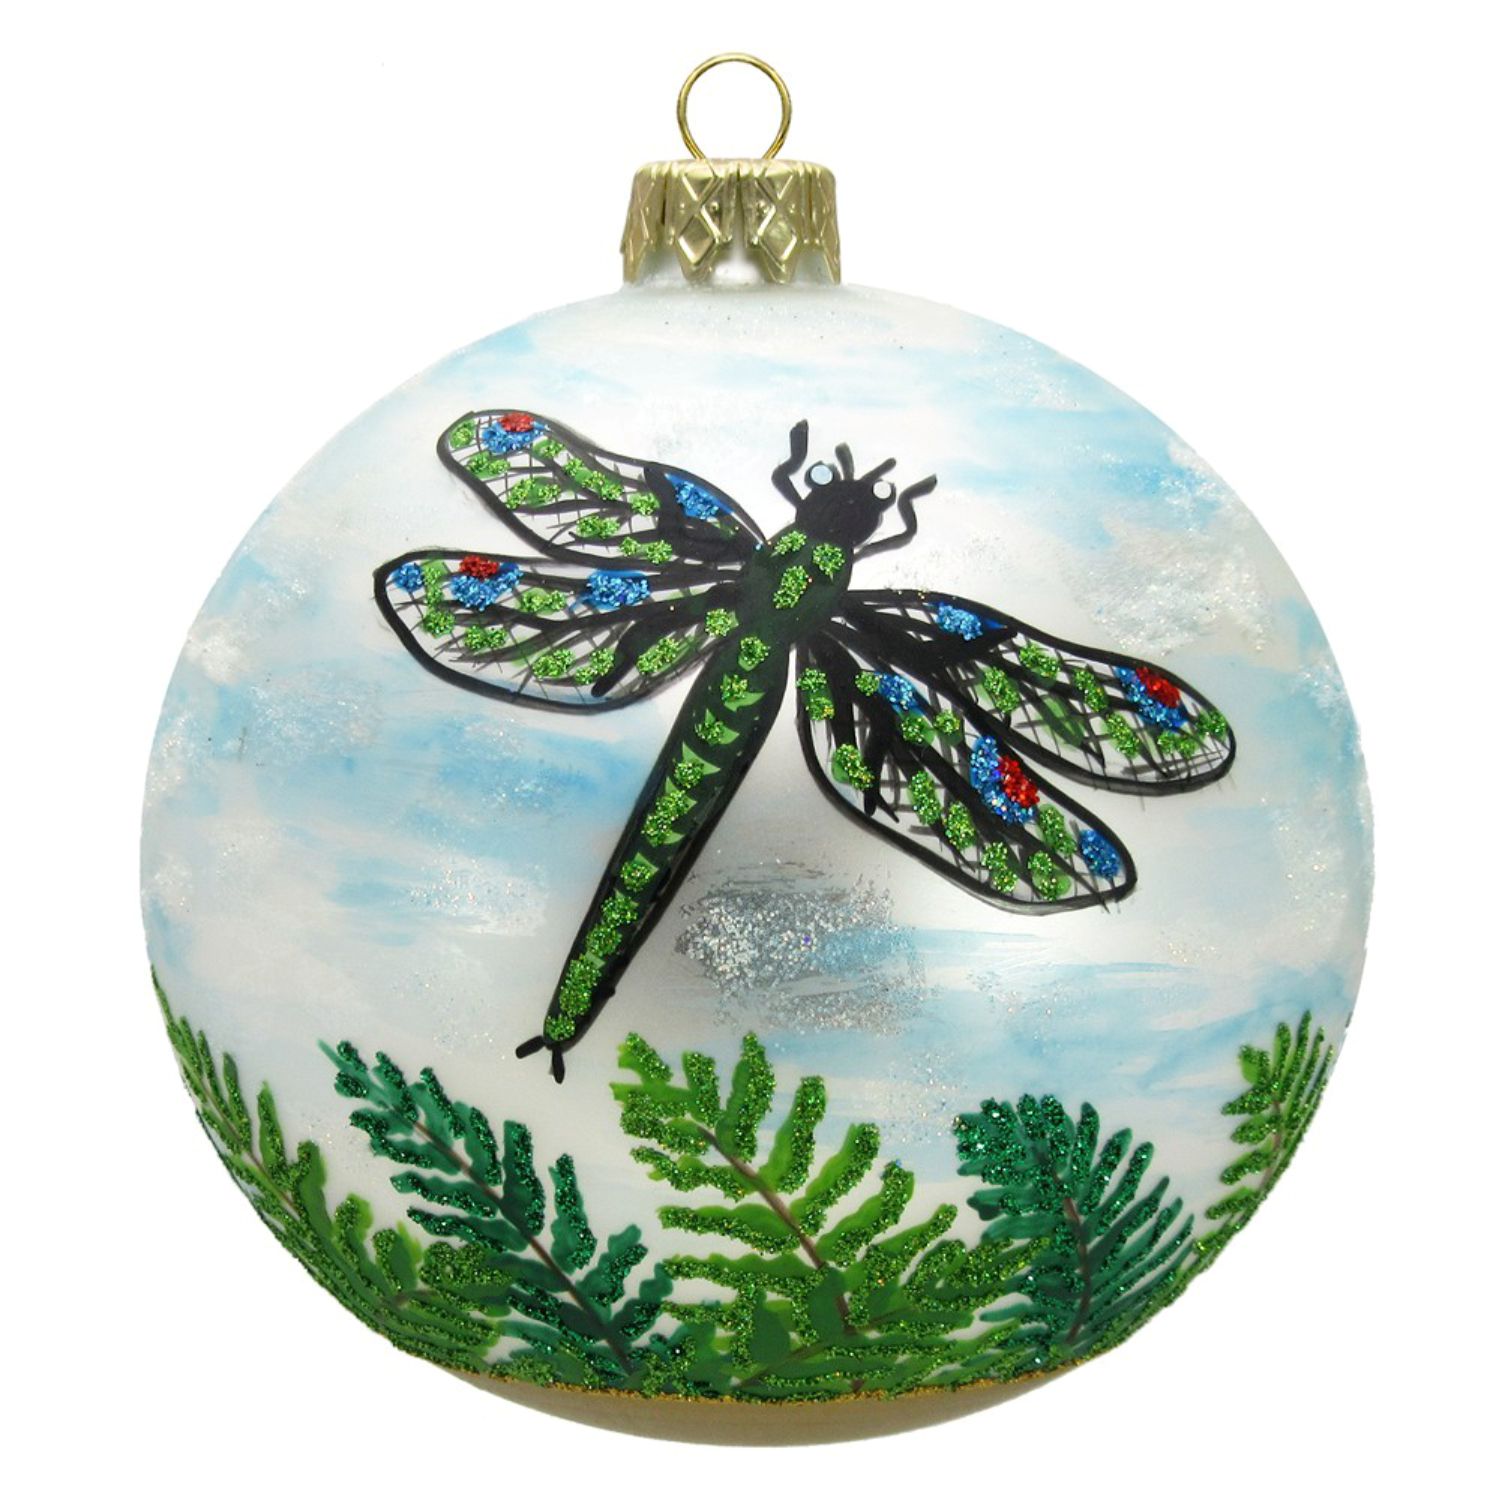 Dragonflies Christmas Ornament Symbol of Growing Wisdom Personalized by RussellRhodes.com